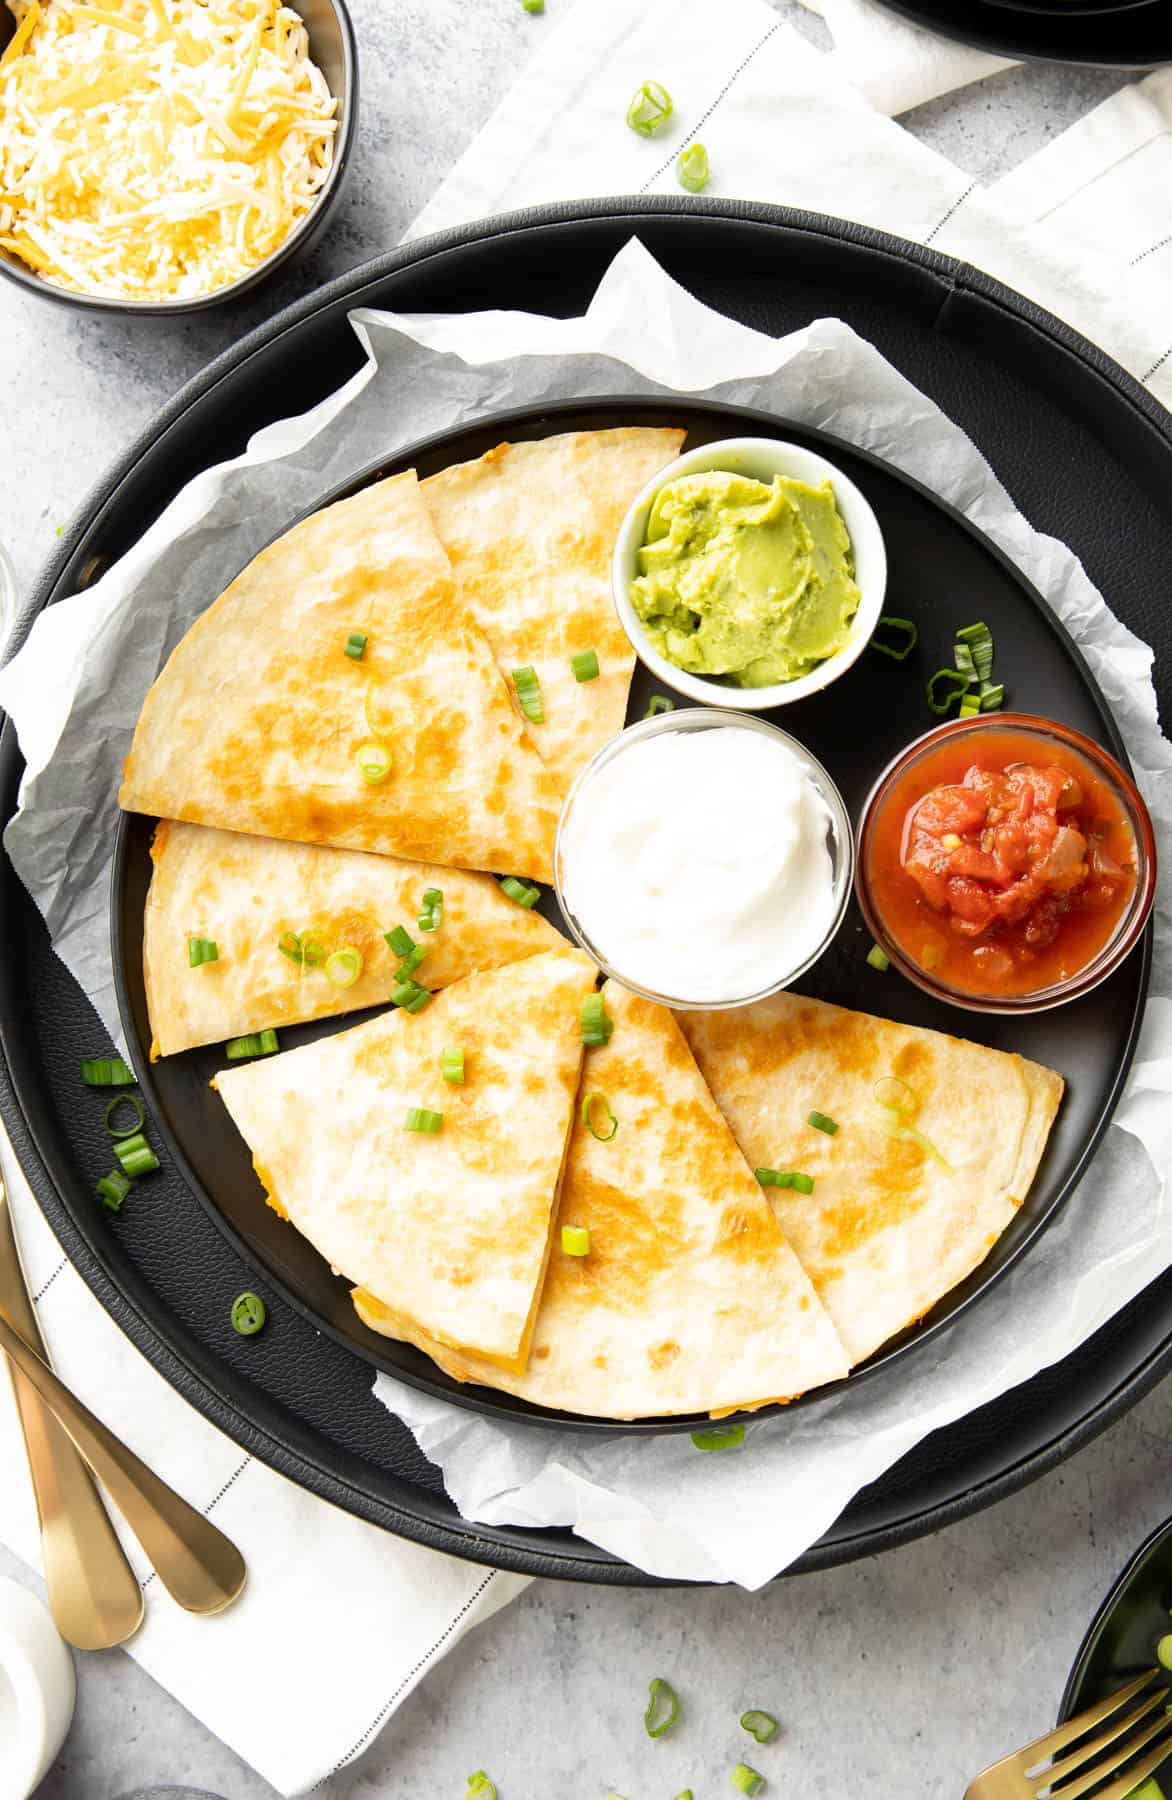 slices of cheese quesadilla served on a plate with guacamole, salsa, and sour cream